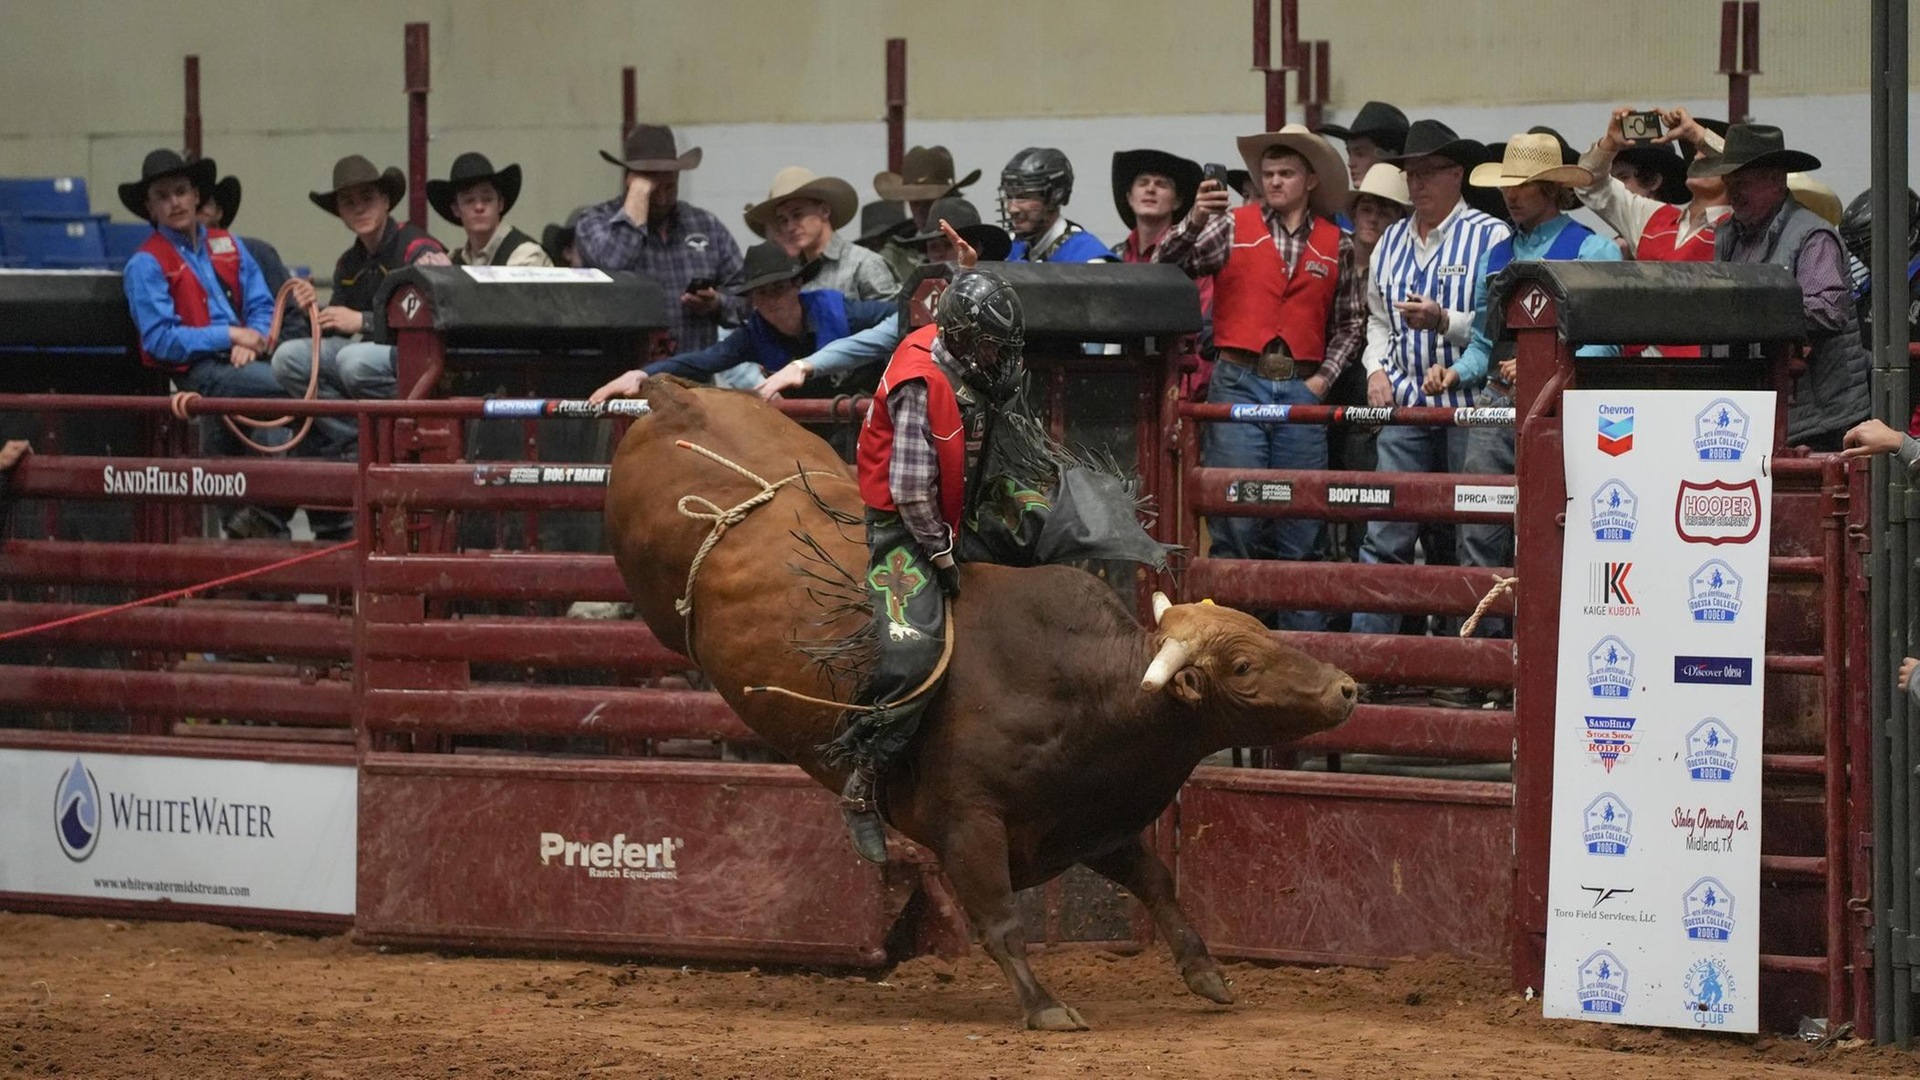 T-Bird Rodeo Sends 3 Athletes to the Short Round in Big Spring